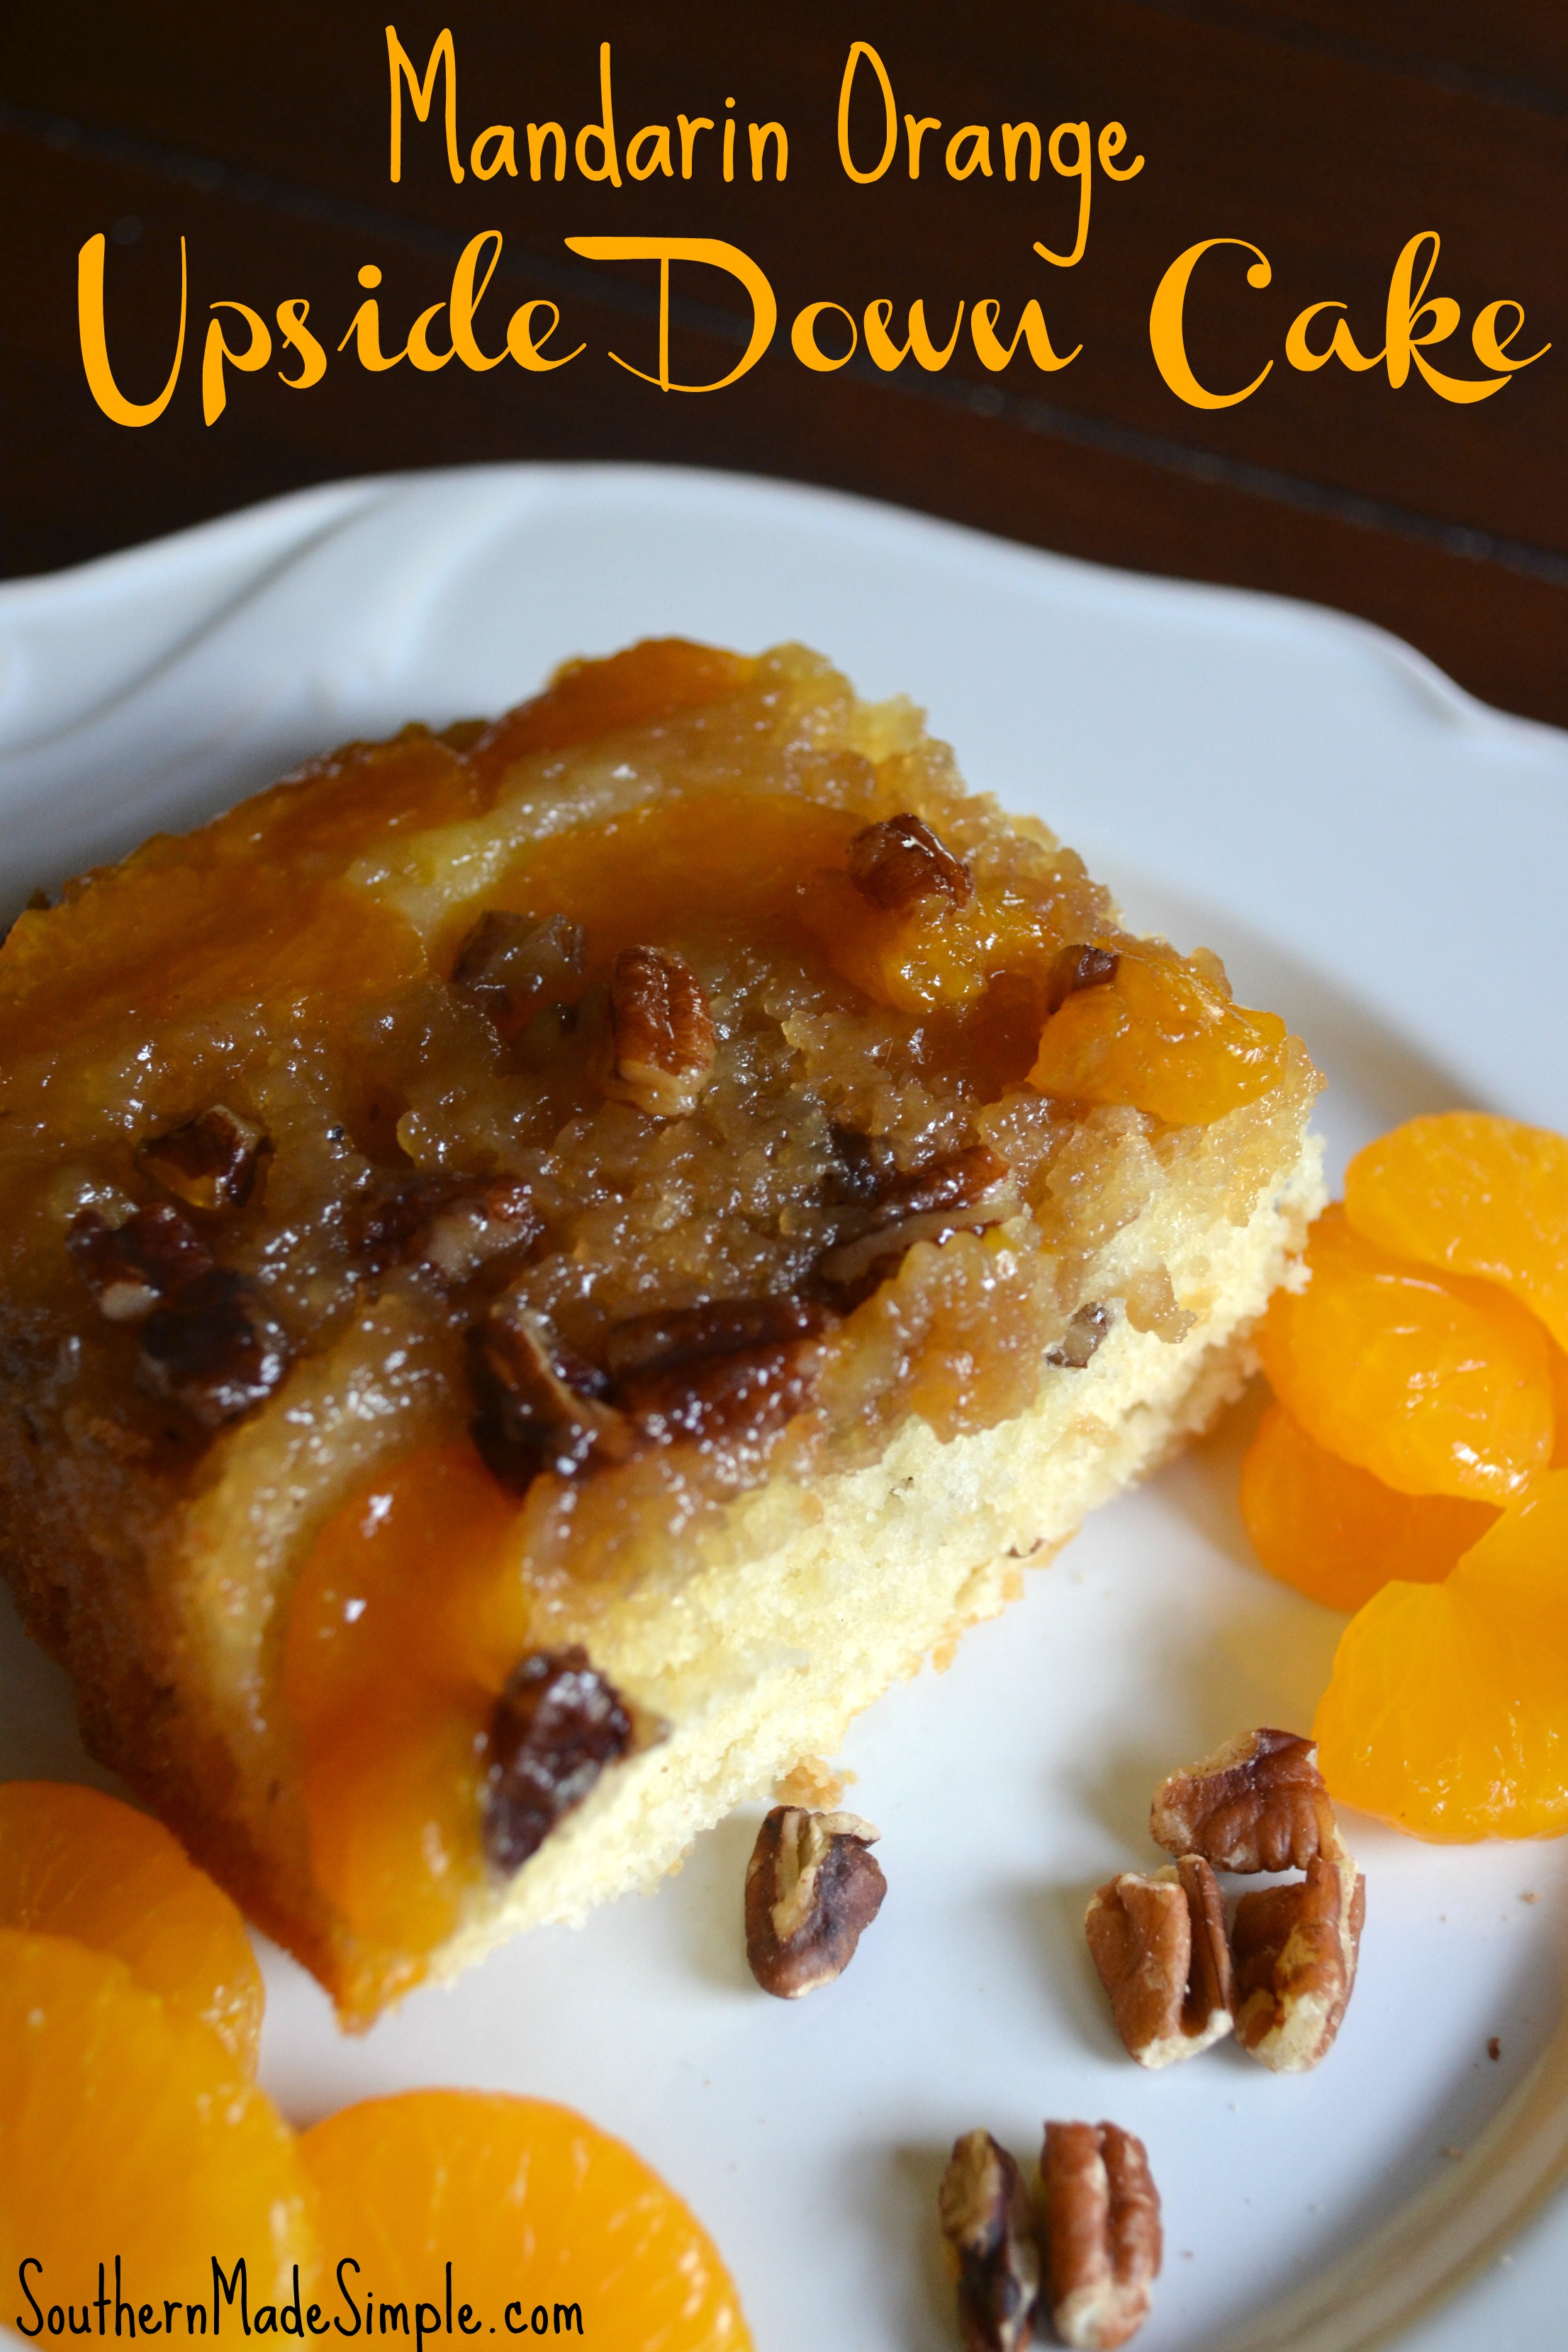 Easy + delicious Mandarin Orange Upside Down Cake with brown sugar and pecans. So delicious and only uses a few ingredients!